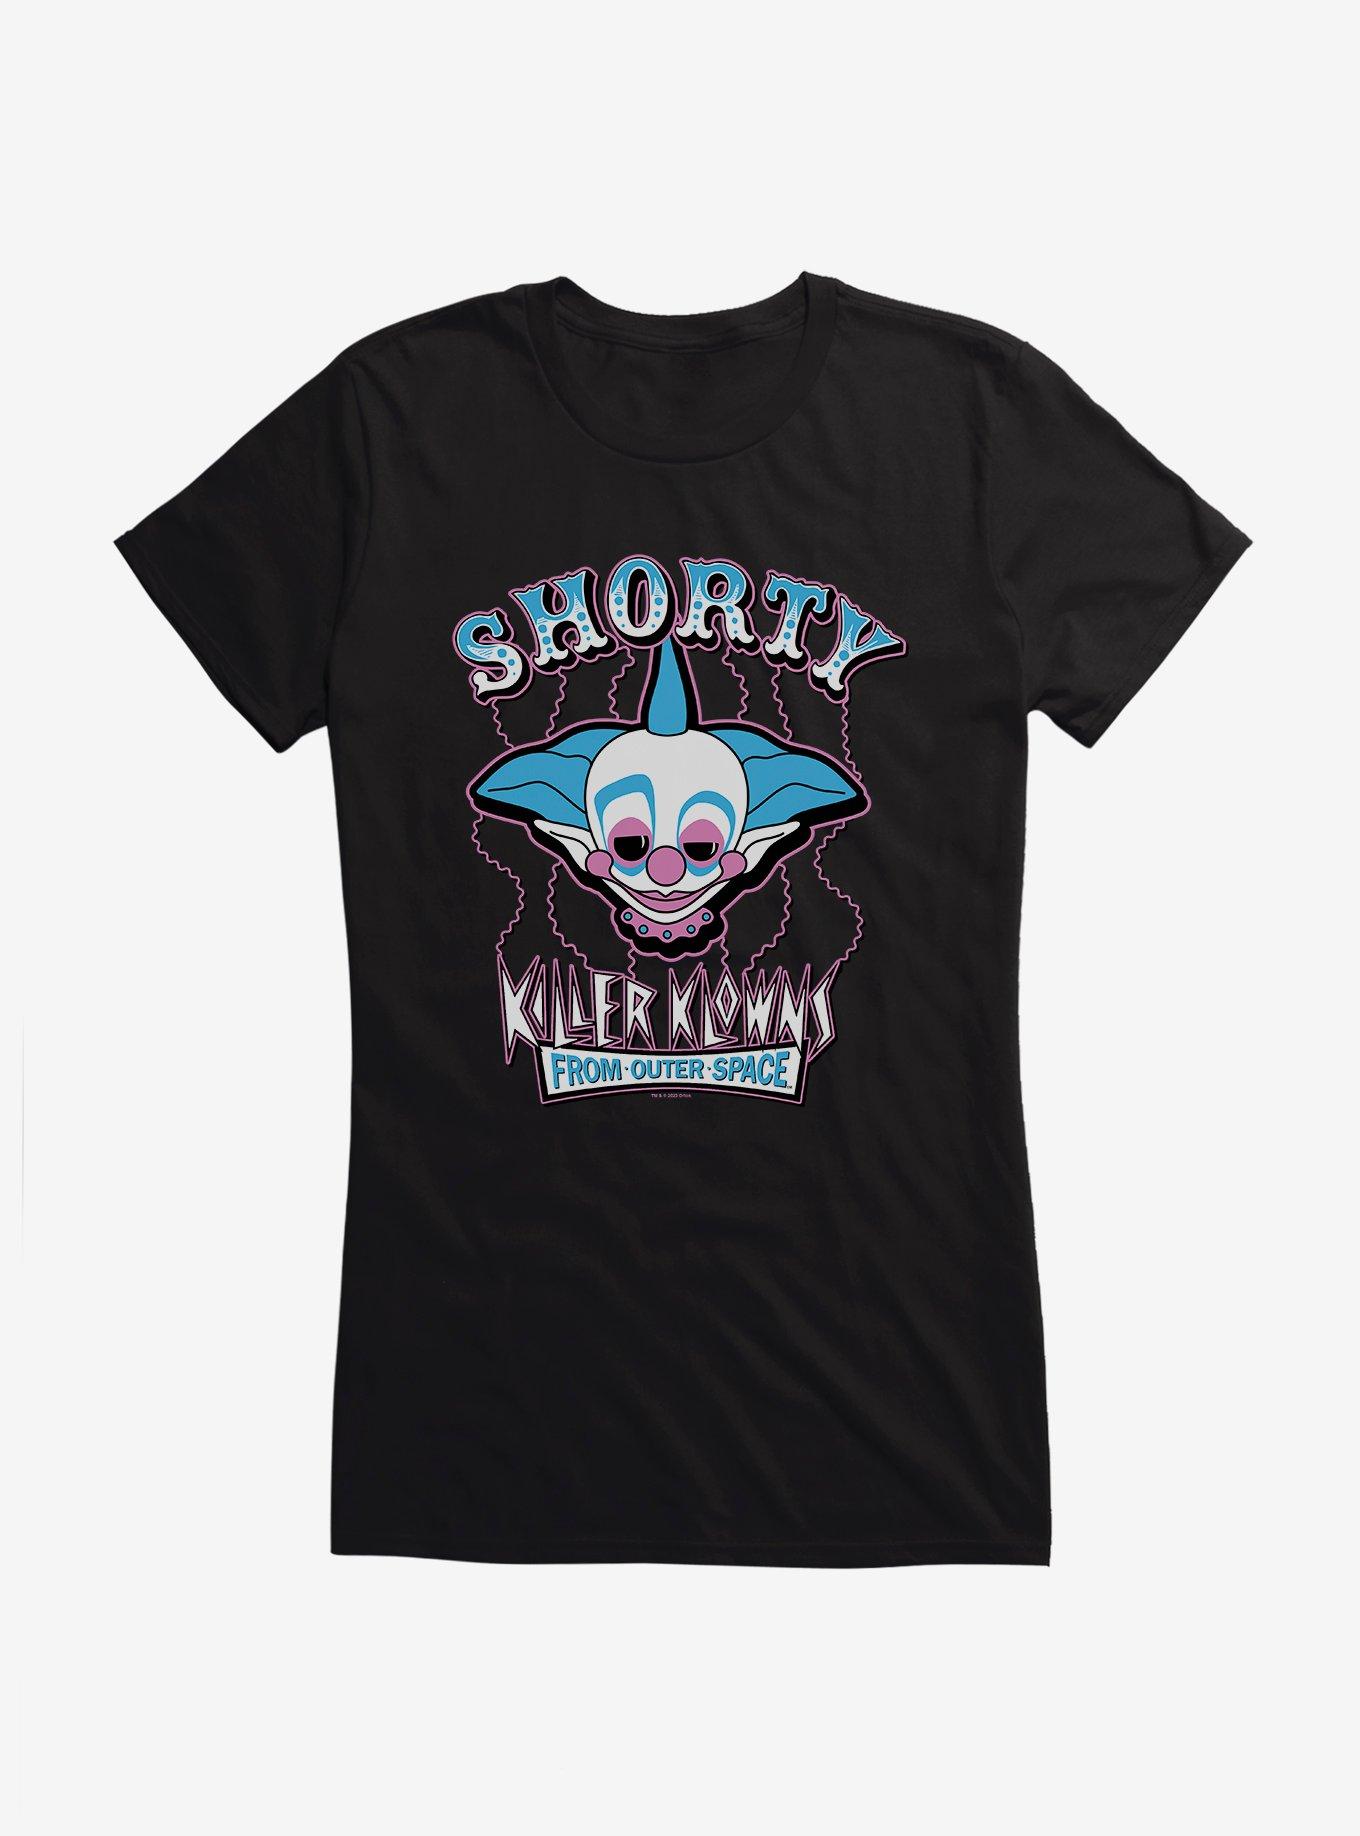 Killer Klowns From Outer Space Shorty Girls T-Shirt, BLACK, hi-res